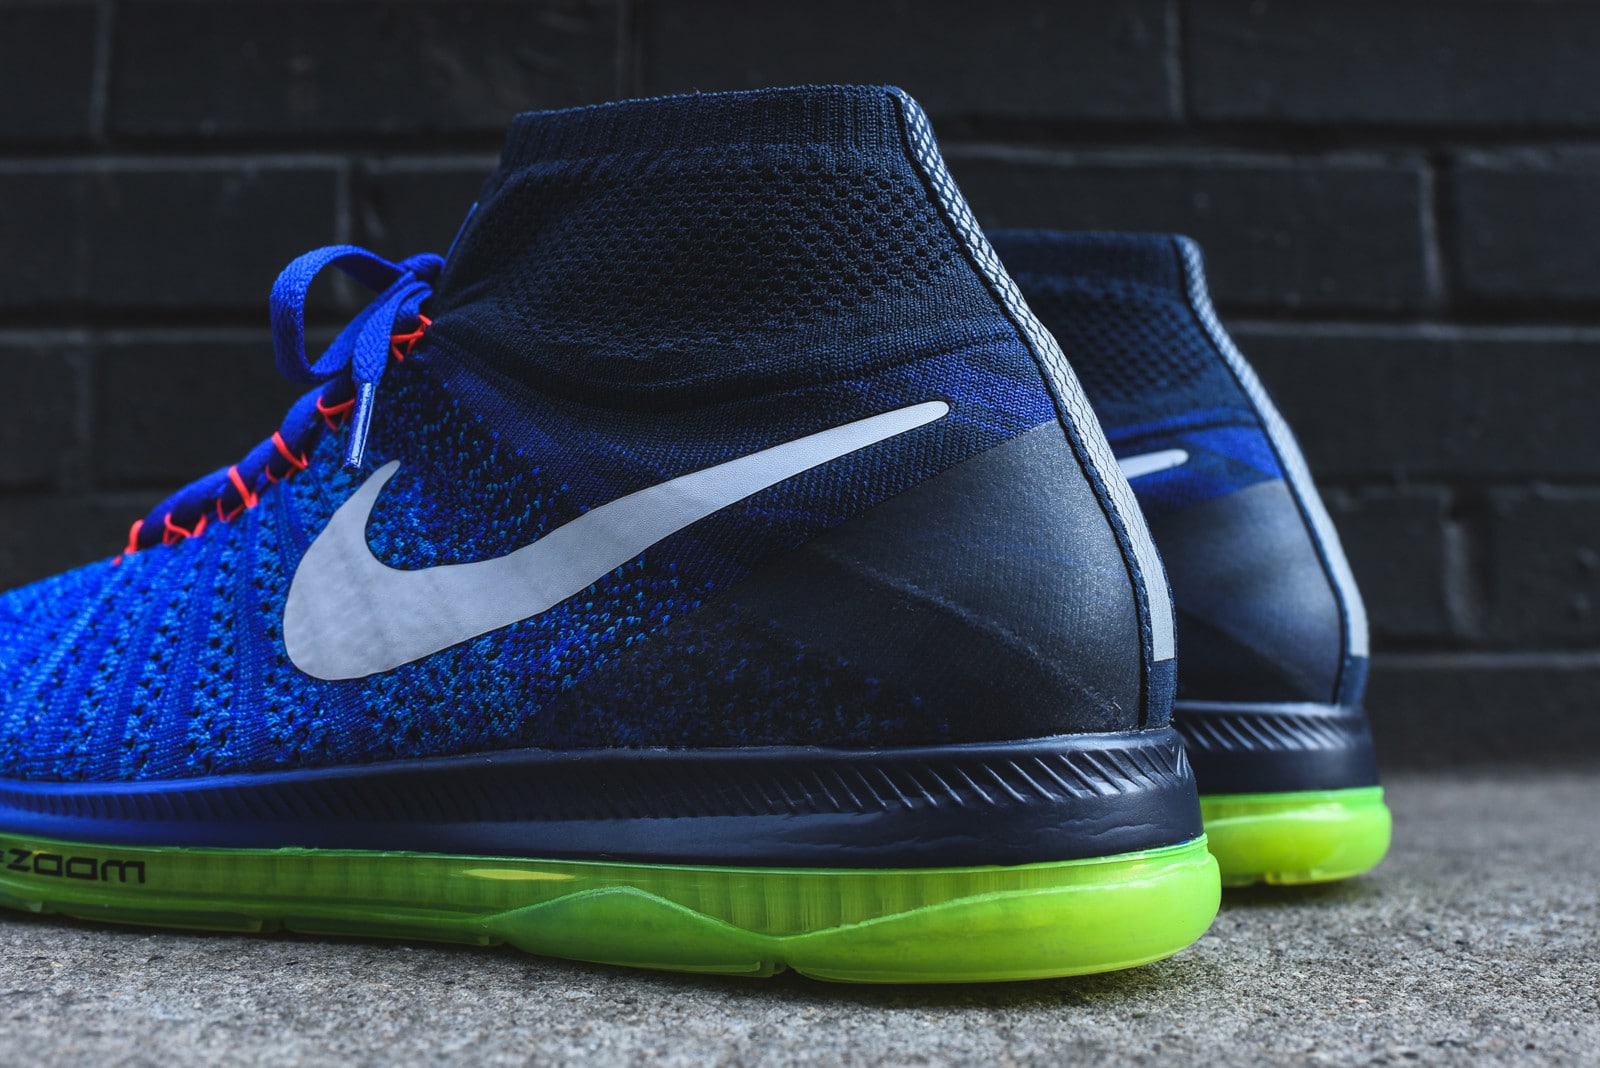 Nike_Zoom_All_Out_Flyknit_Pre_Heat_Blue_Volt_7